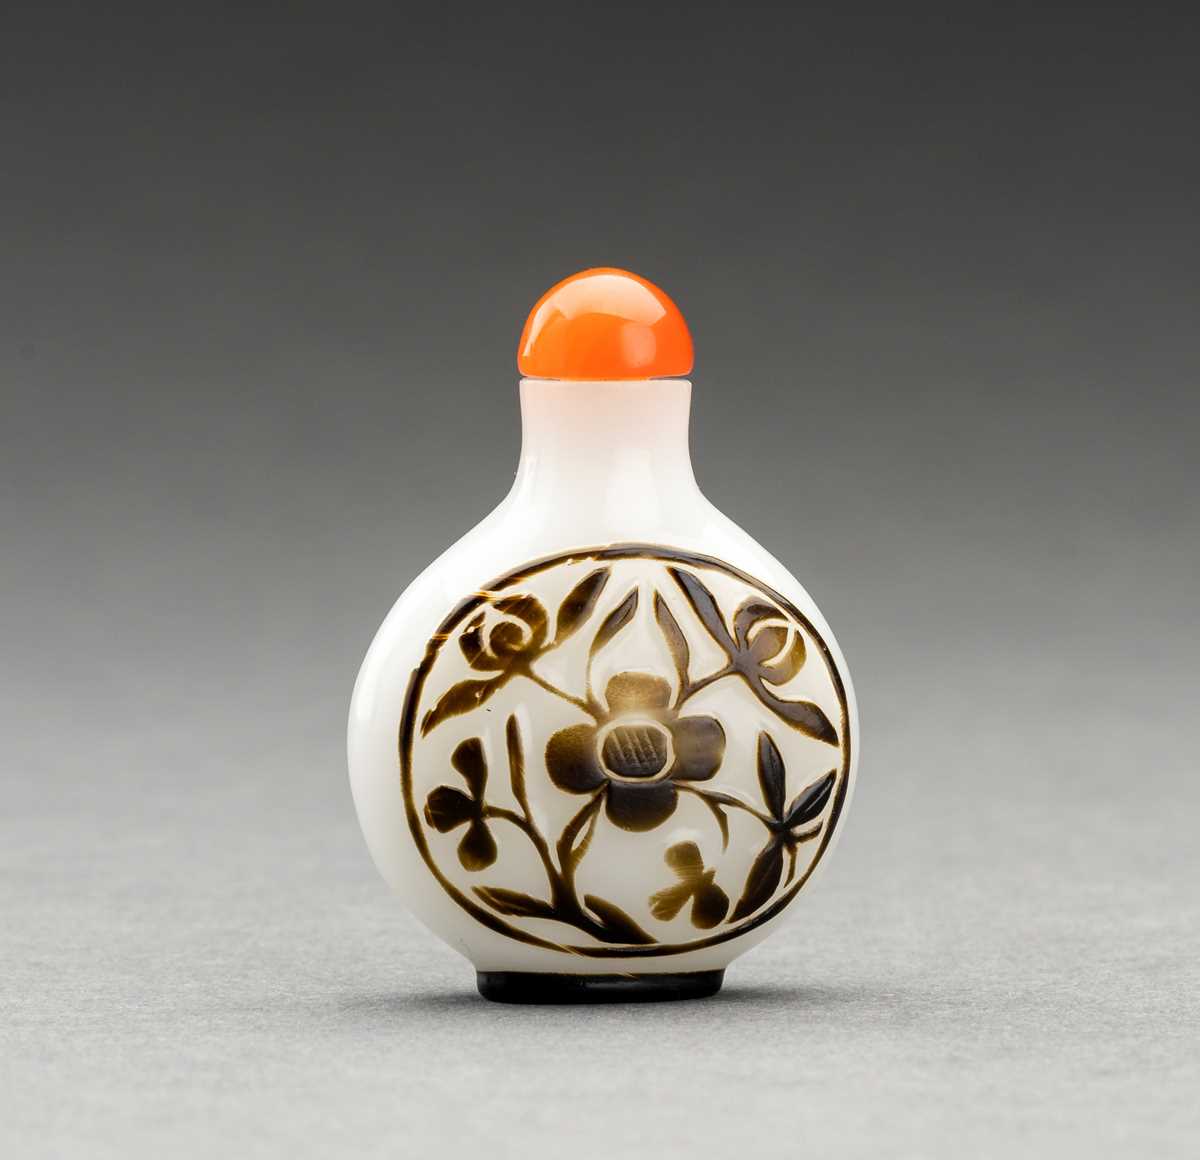 AN OLIVE-BROWN OVERLAY ‘FLOWER’ GLASS SNUFF BOTTLE, LATE QING DYNASTY